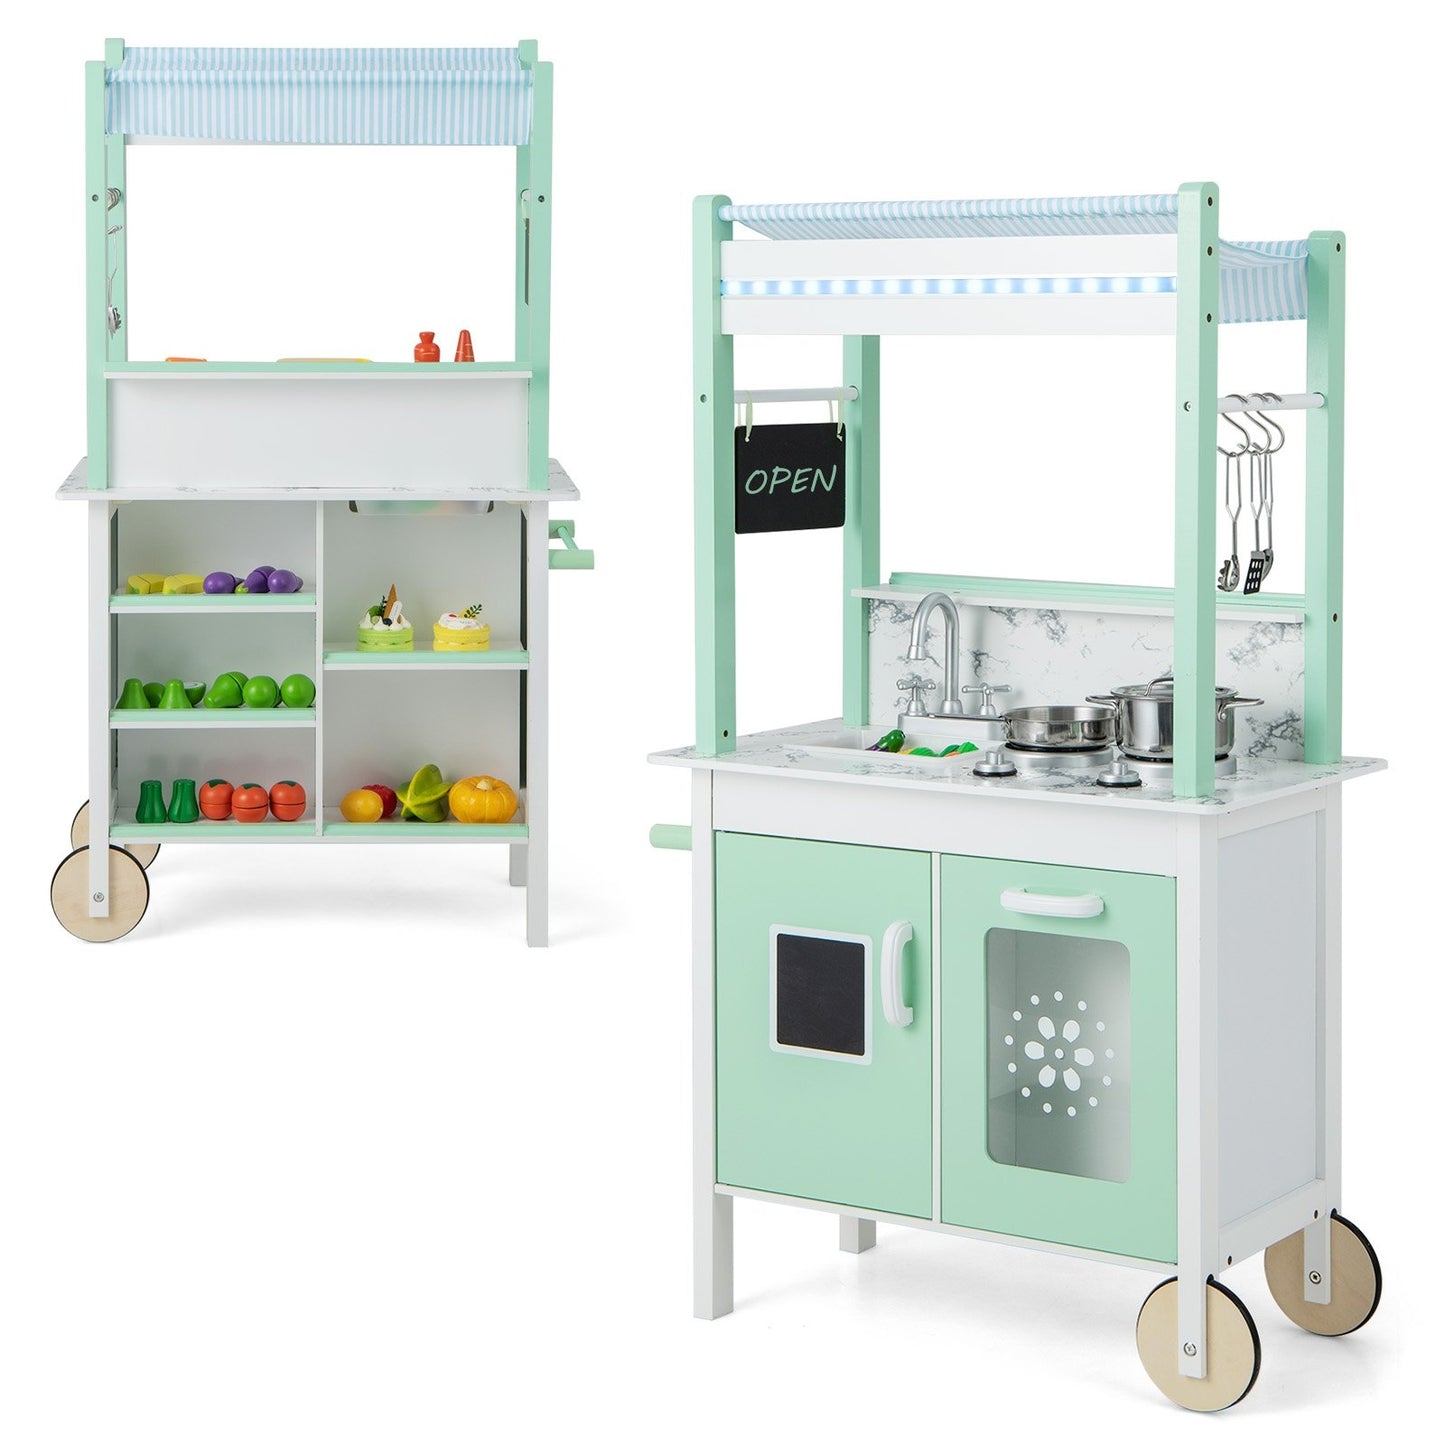 Double-sided Pretend Play Kitchen with Remote Control and LED Light Bars, Green